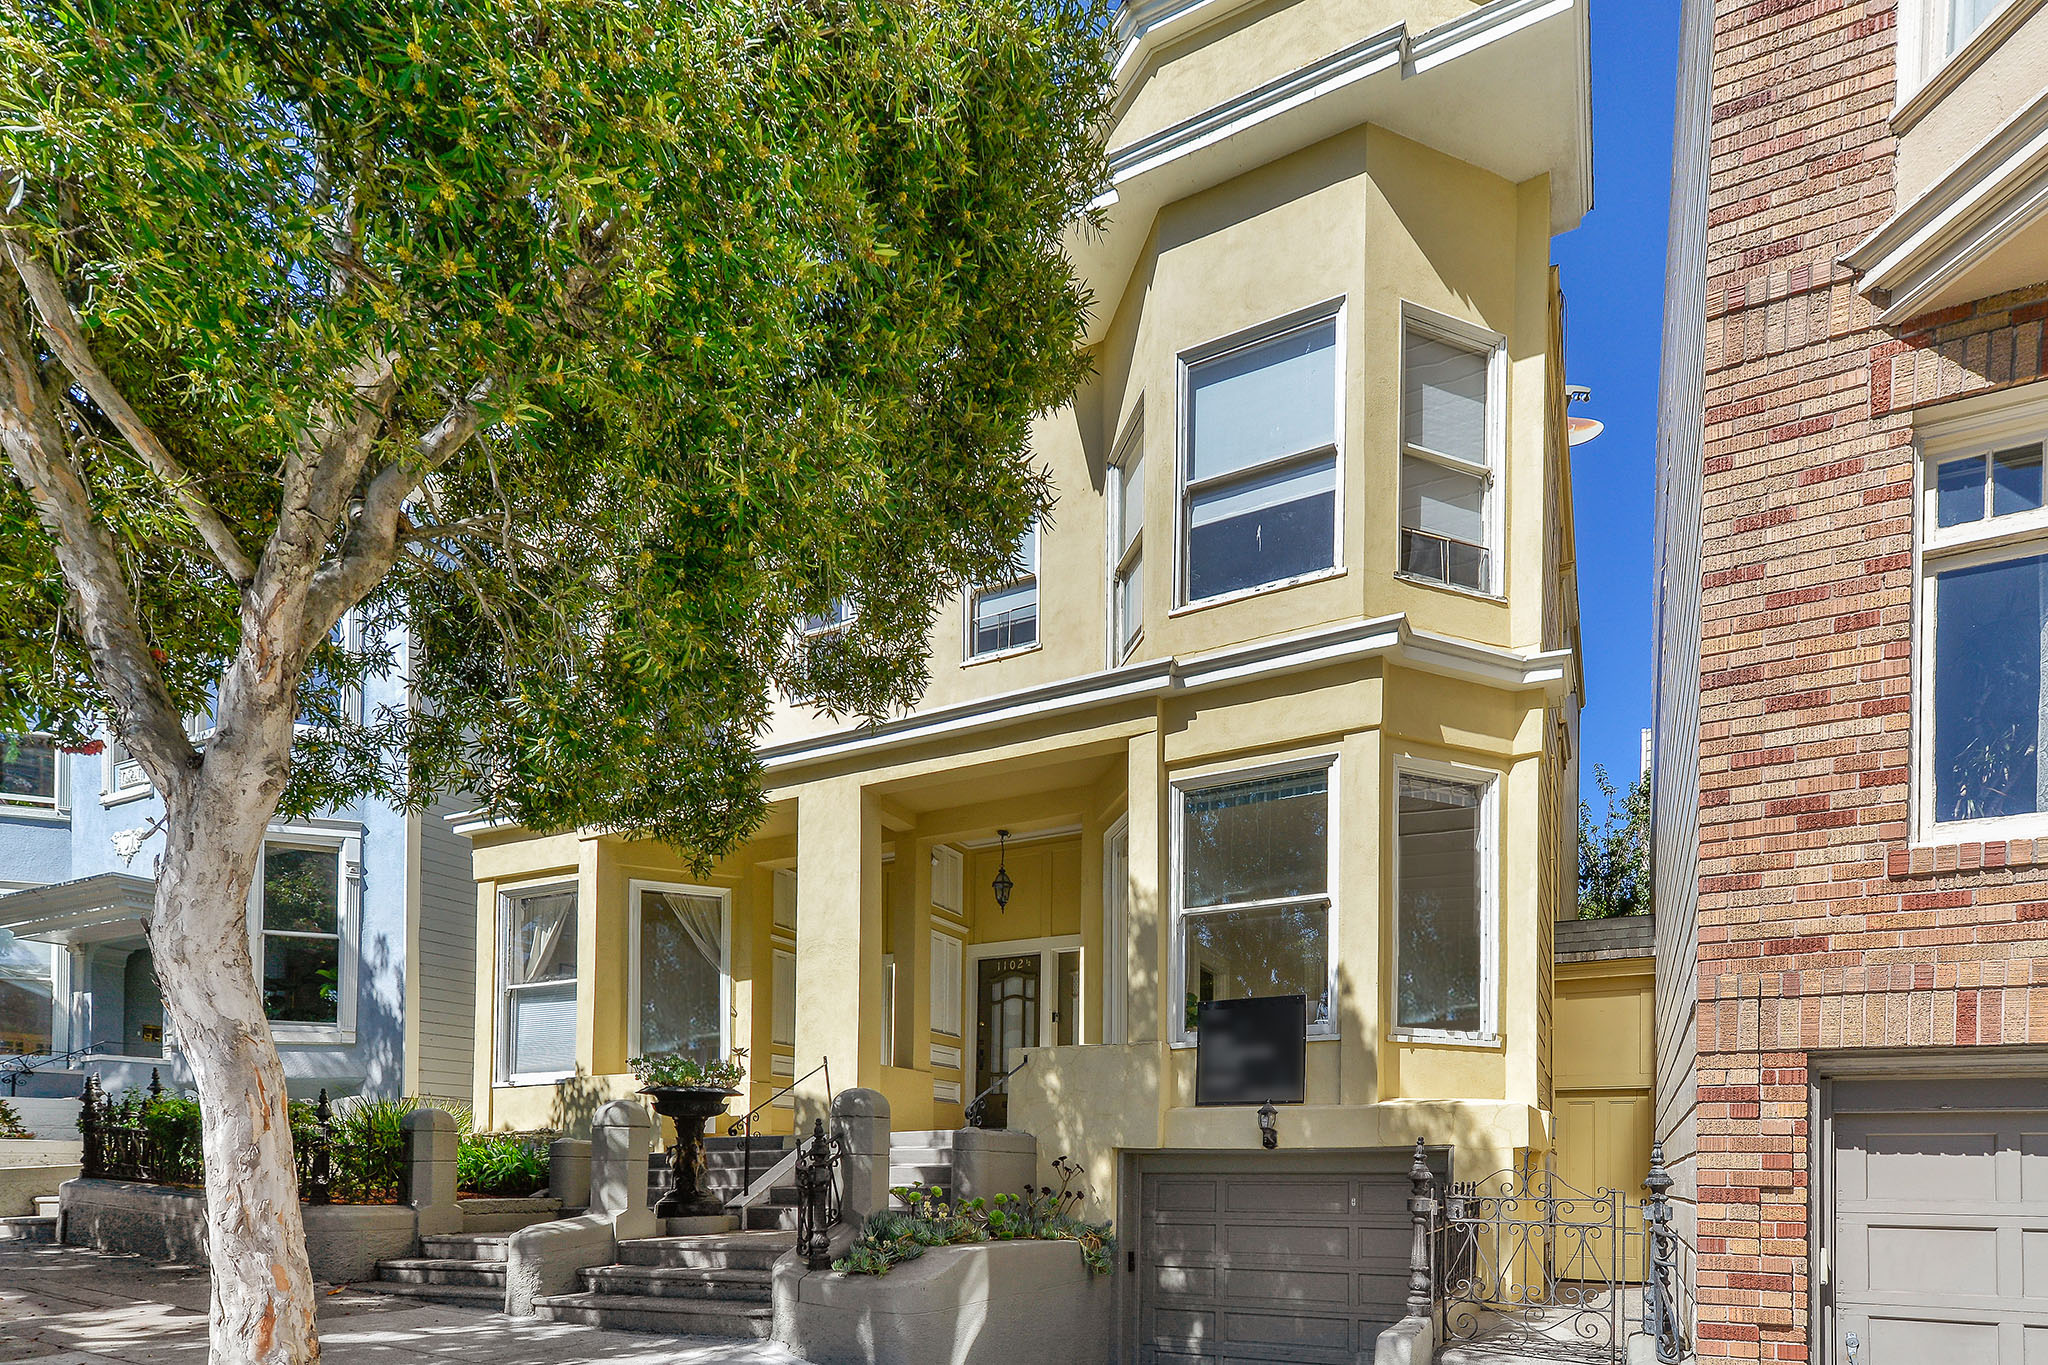 Property Photo: Street view of 1104.5 Fulton Street, showing a yellow home